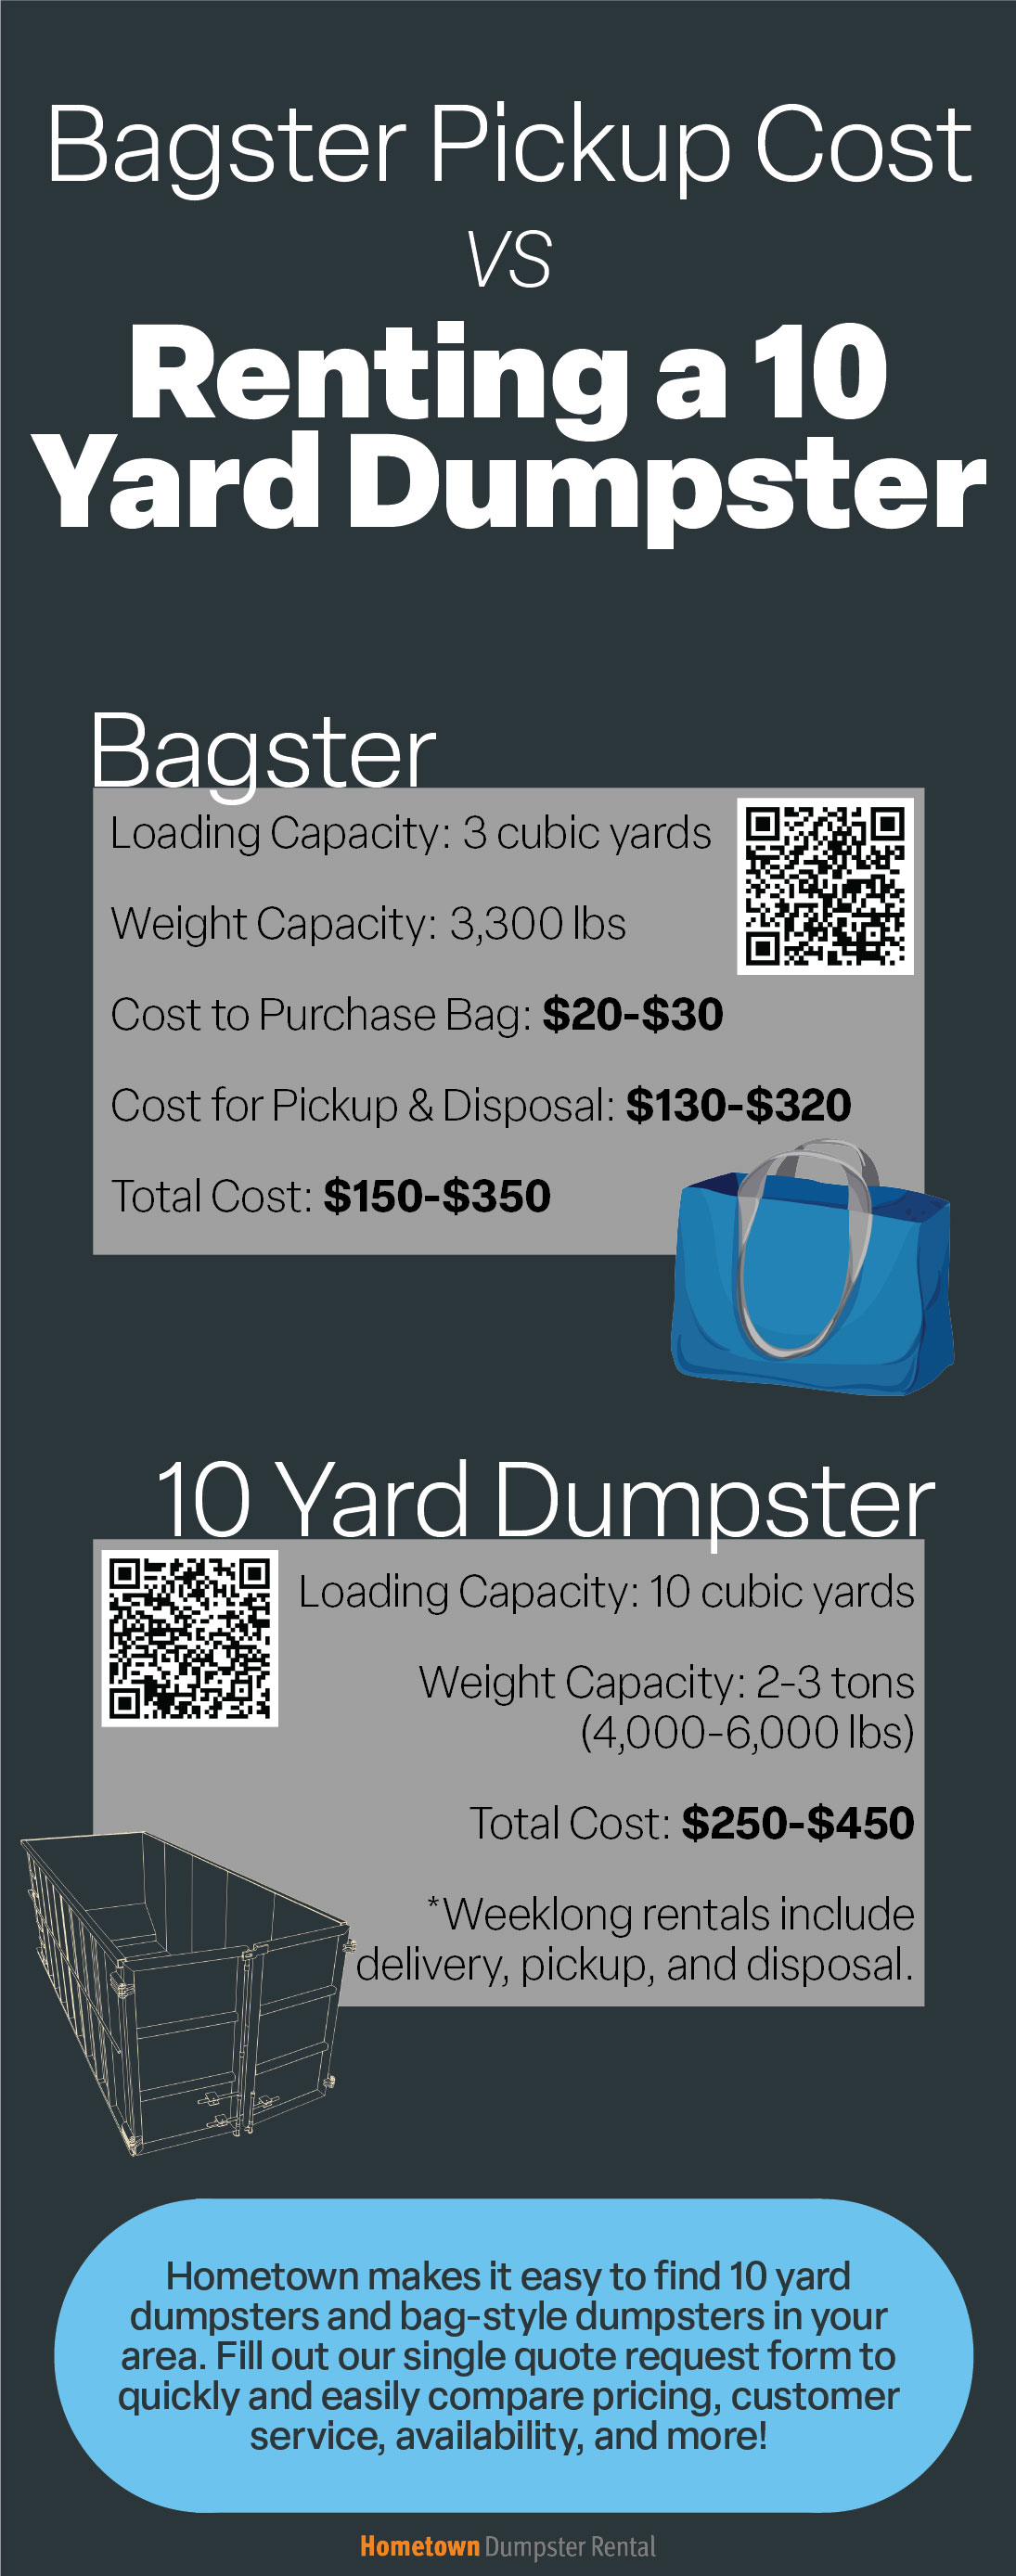 Bagster Pickup Cost vs Renting a 10 Yard Dumpster Infographic